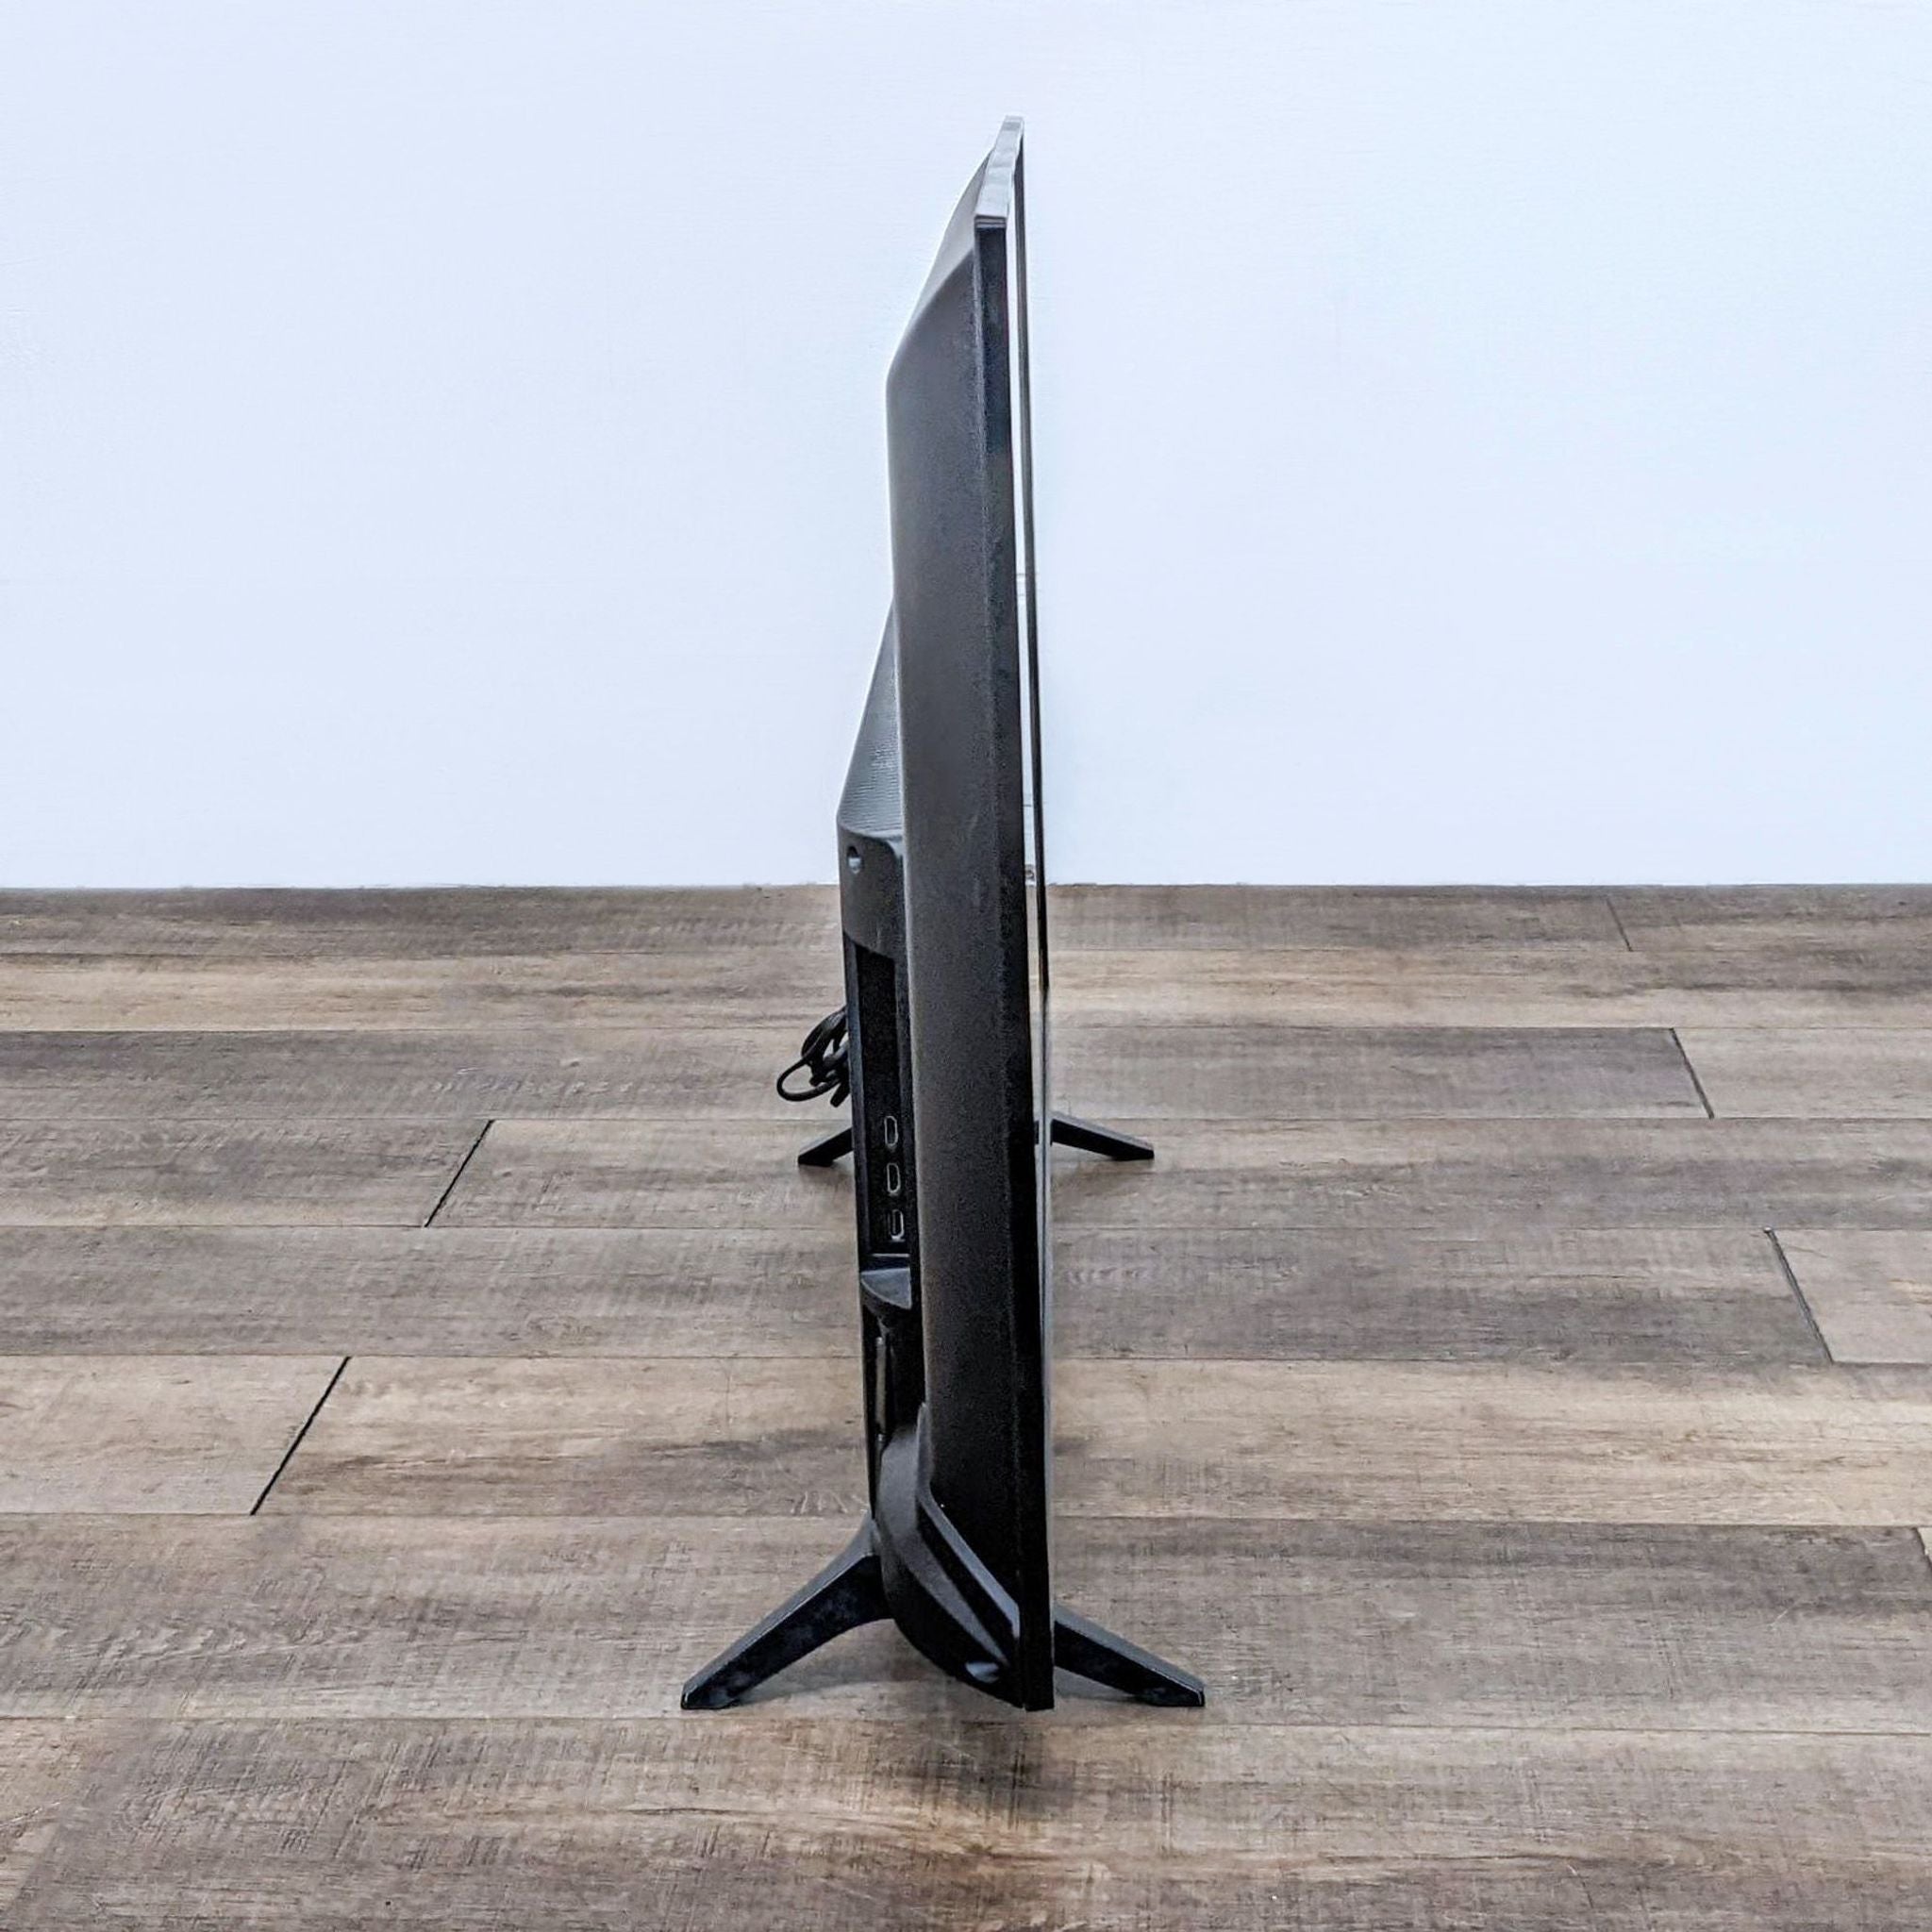 Side angle of an LG TV showcasing its slim profile and stand on a wooden surface.